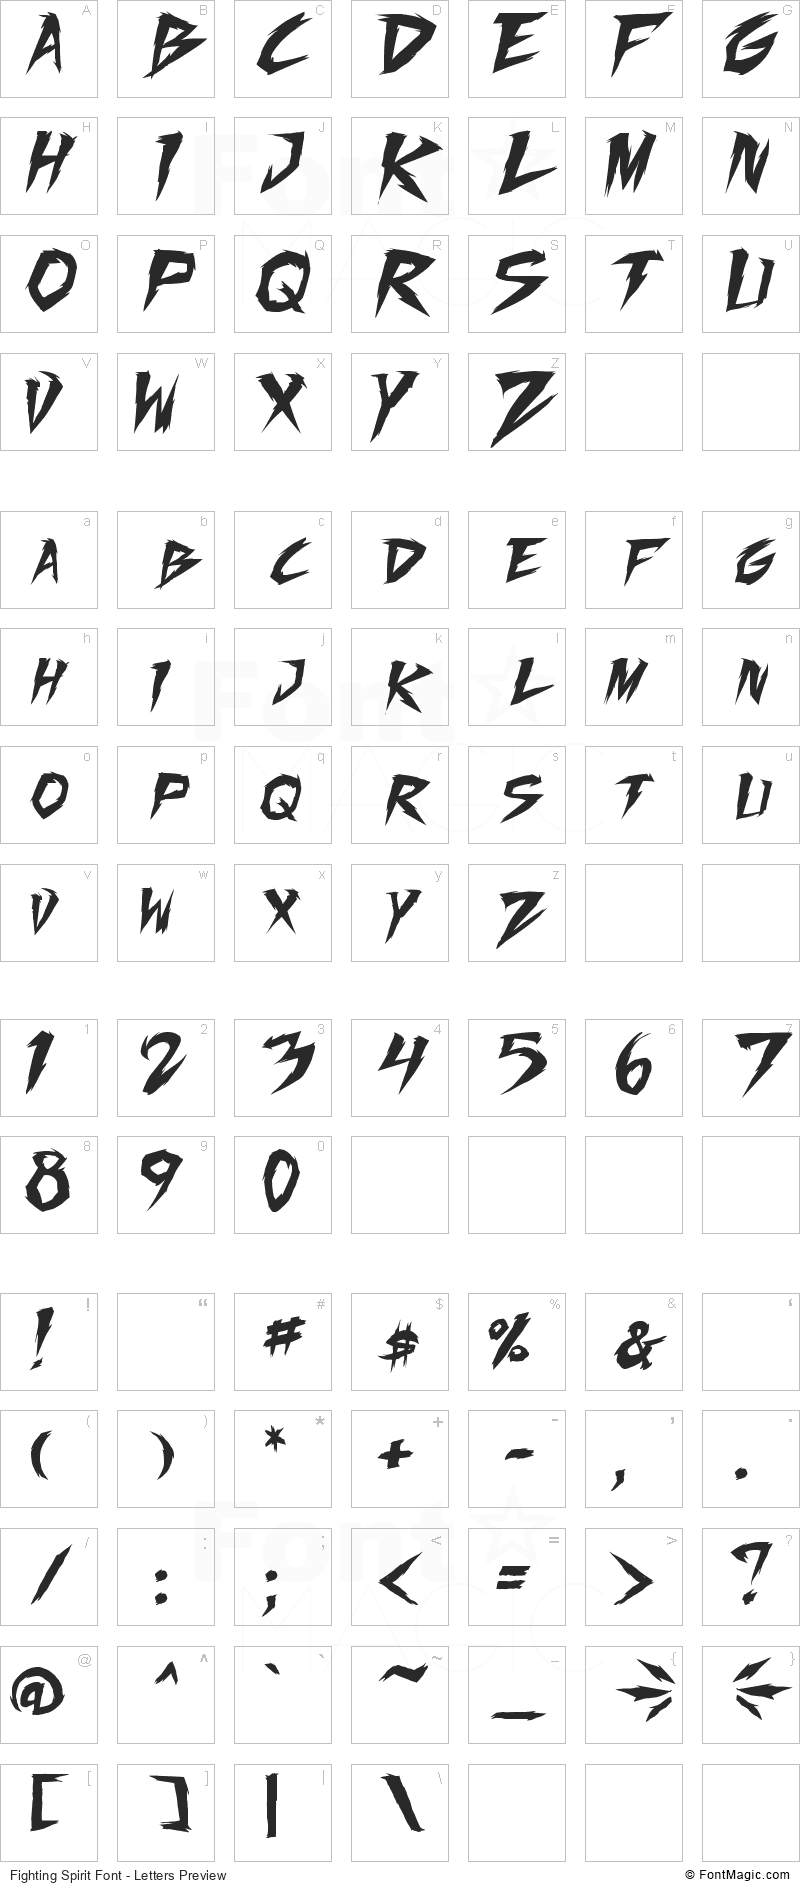 Fighting Spirit Font - All Latters Preview Chart